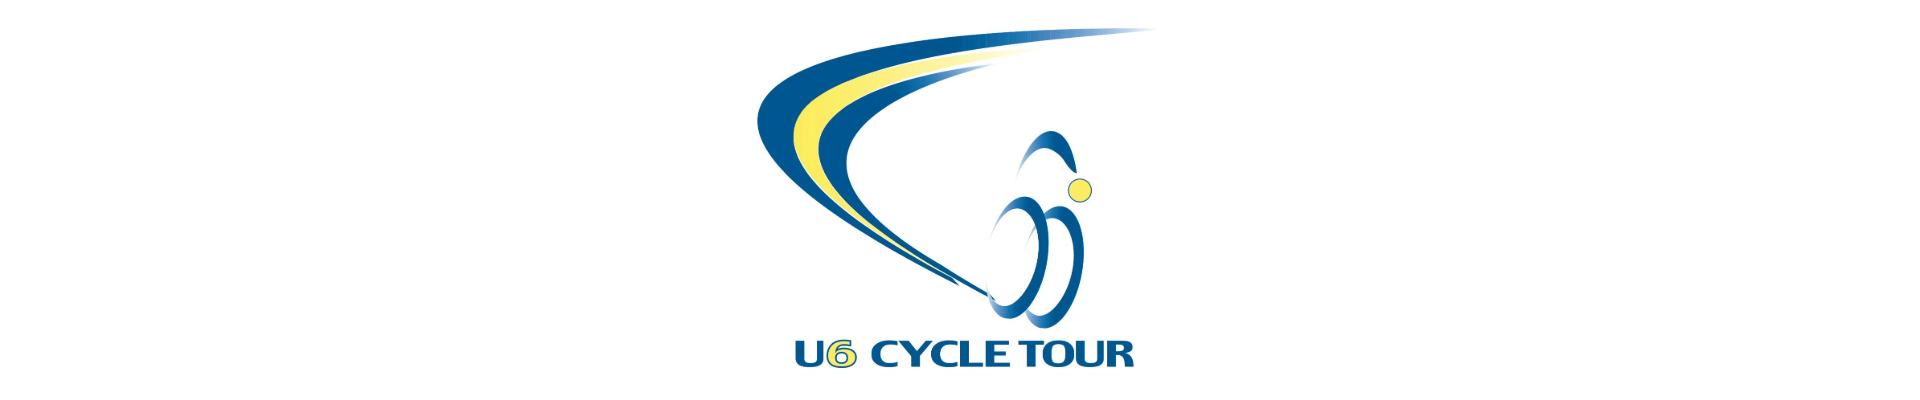 U6 Cycle Tour - stage 1